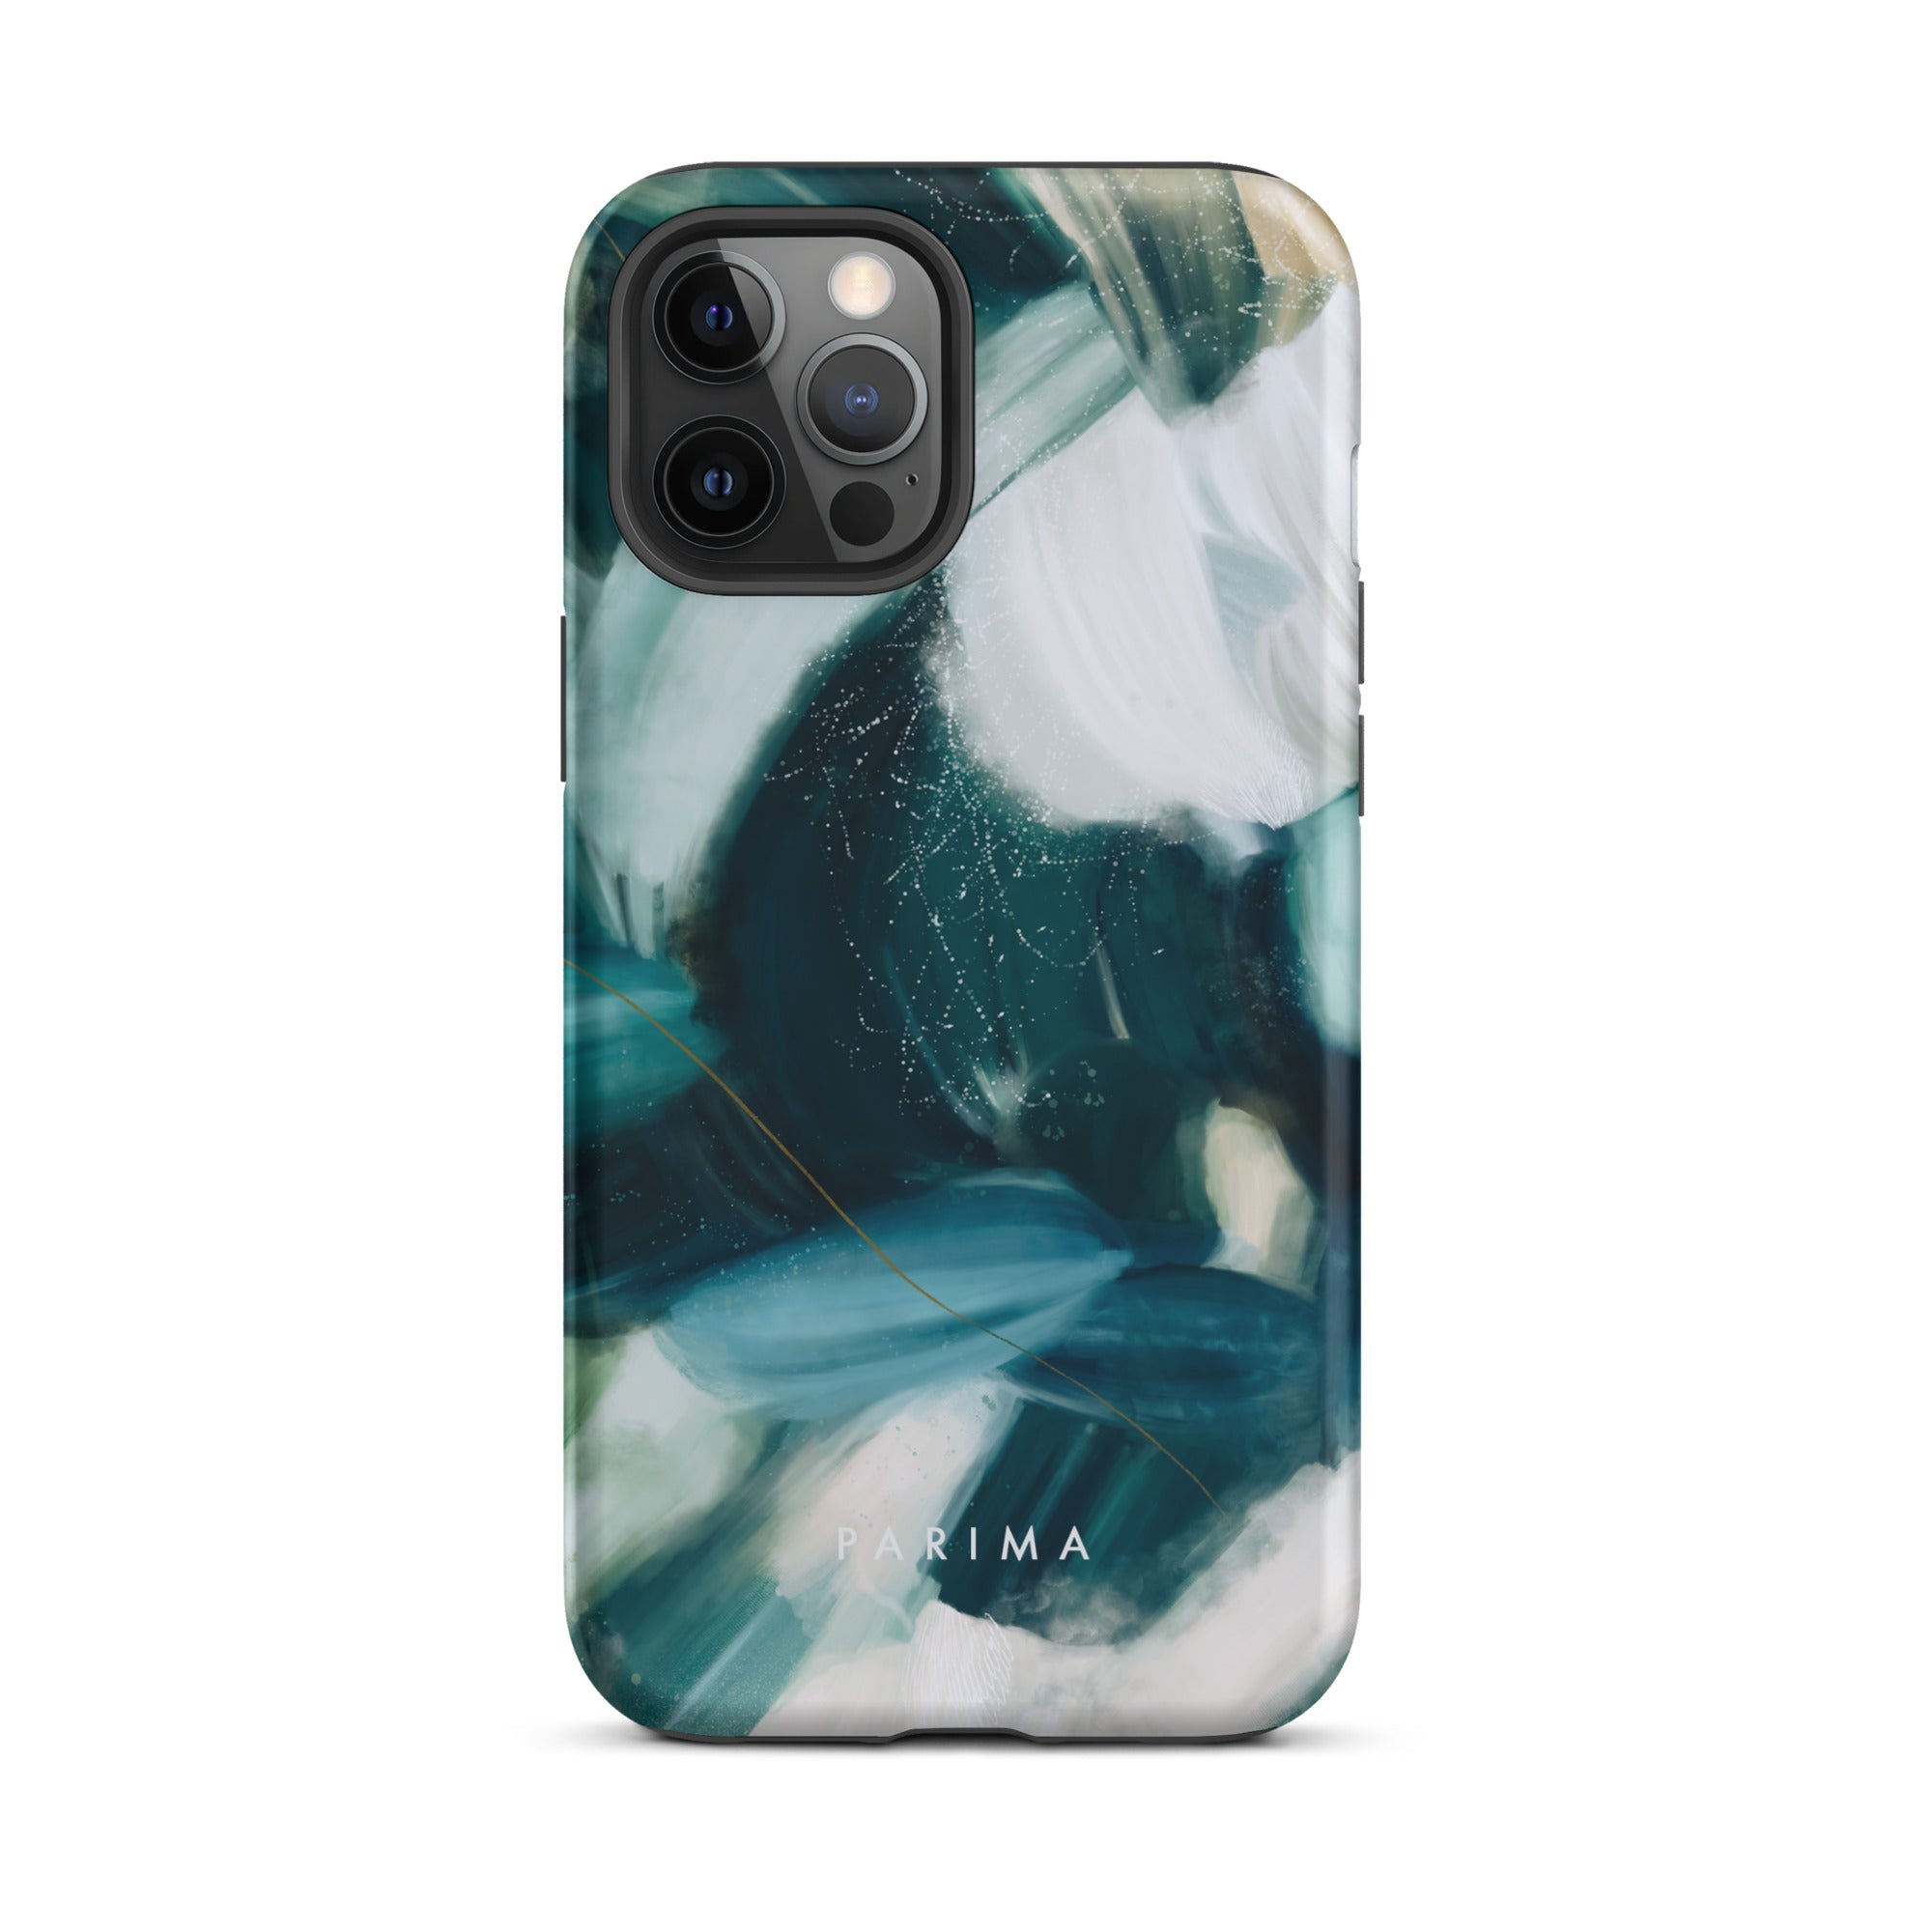 Caspian, green and blue abstract art - iPhone 12 Pro Max tough case by Parima Studio